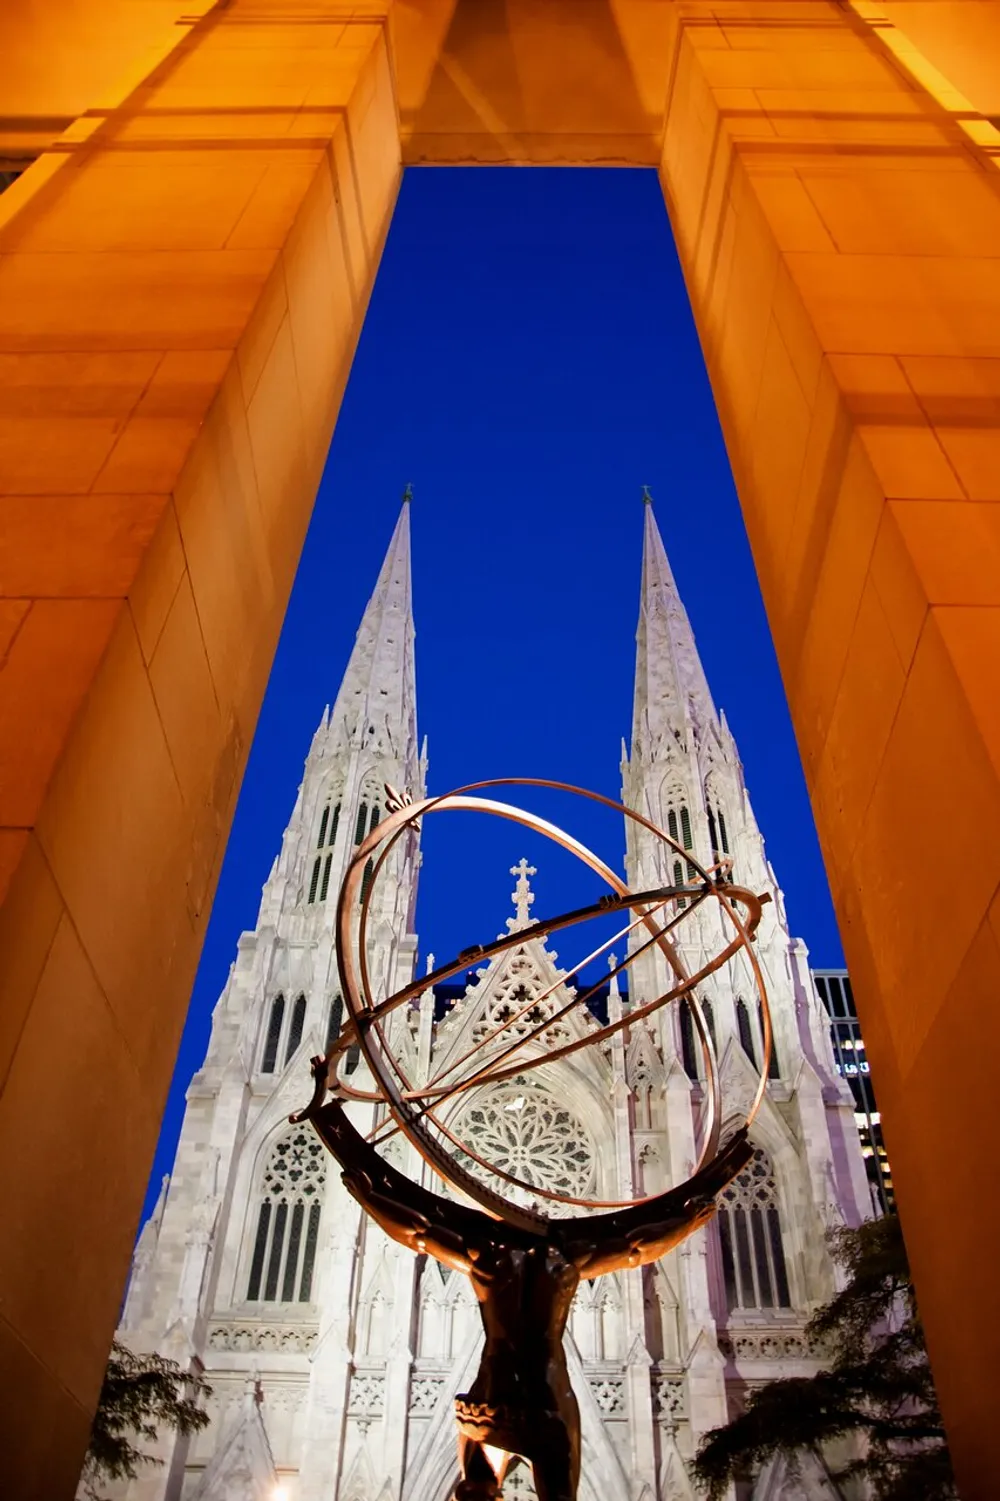 The image shows the towering spires of a Gothic cathedral framed by a dramatic archway and contrasted with a modern sculpture in the foreground against a deep blue sky